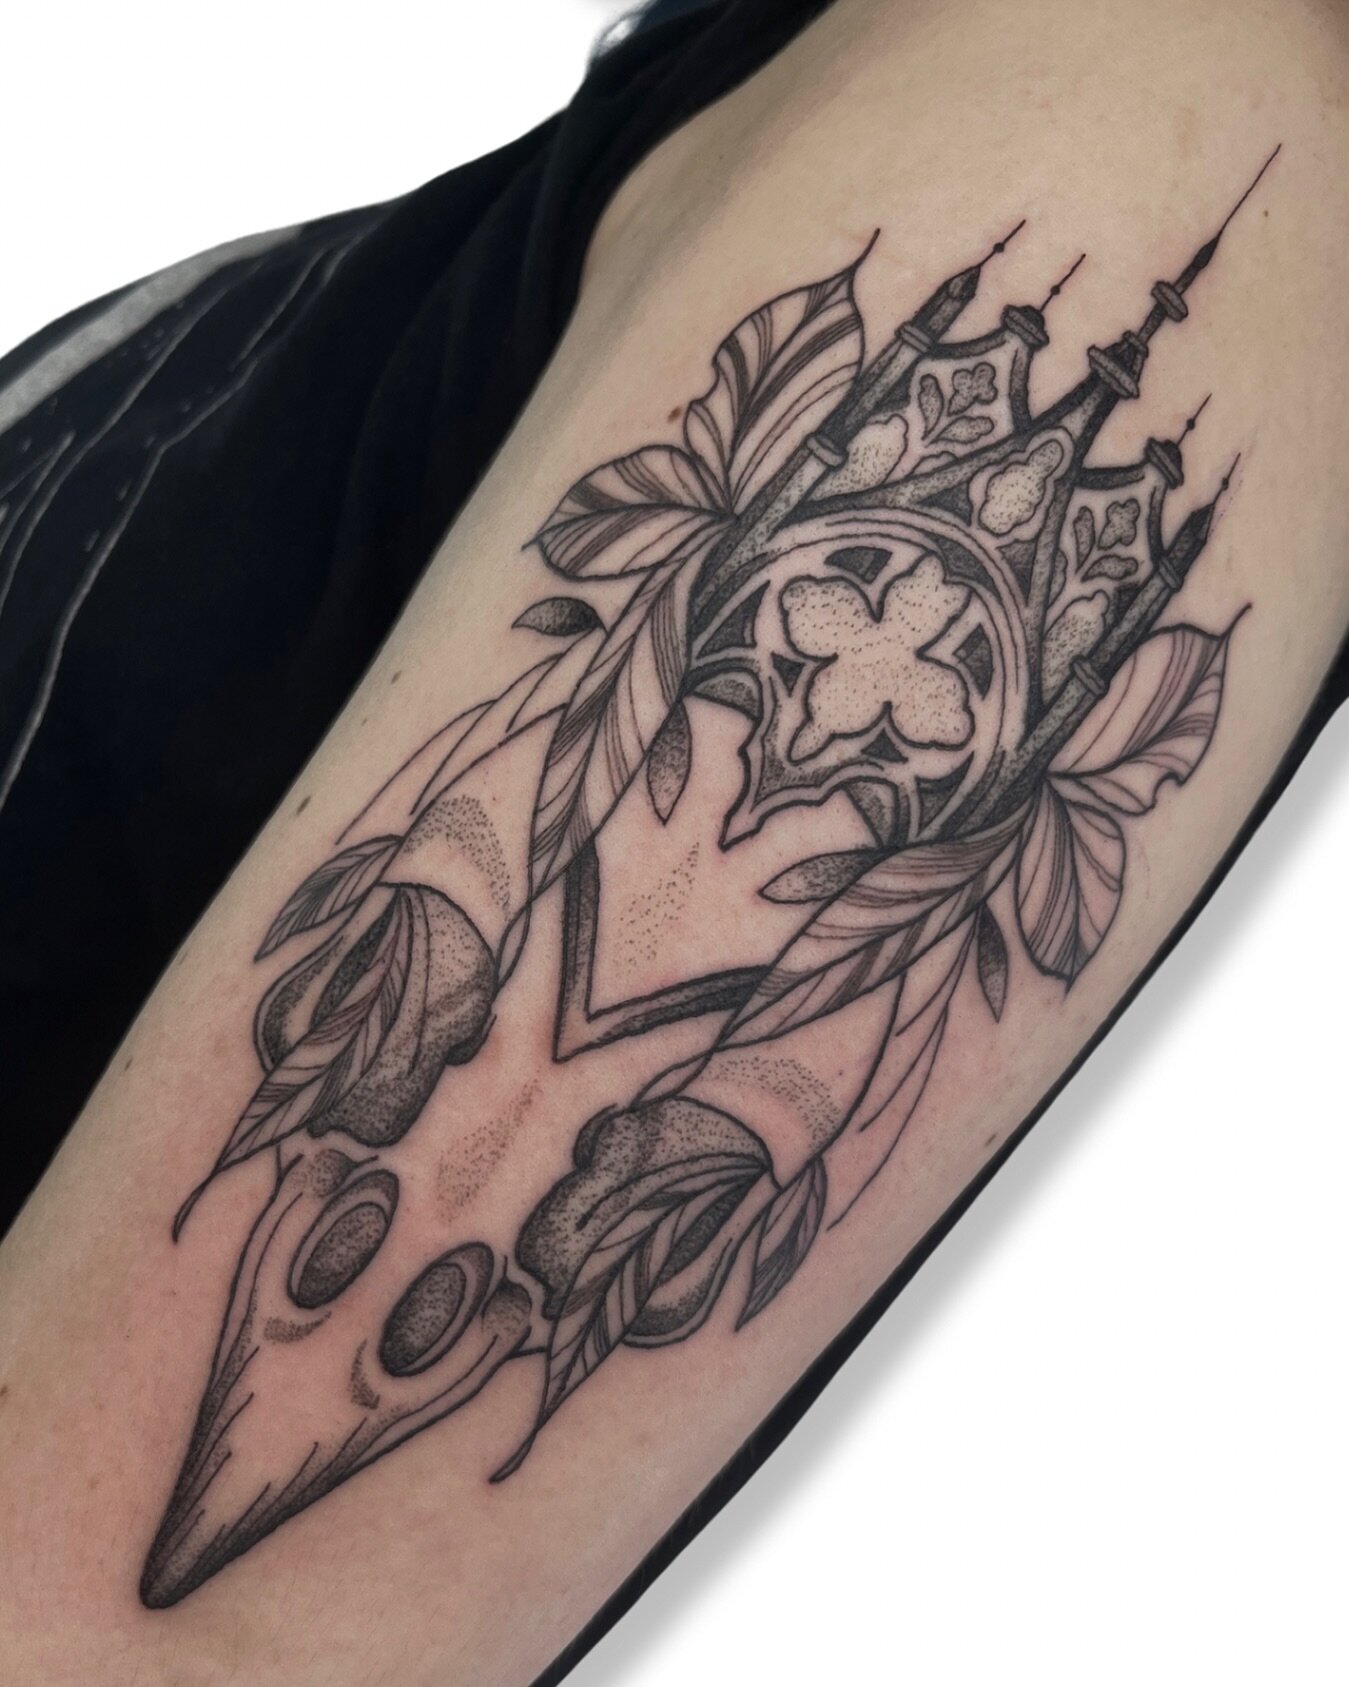 Casey&rsquo;s Flash piece for Raven! Our artists are always excited by the opportunity to tattoo pieces they dreamed up themselves so we love when clients choose to get Flash pieces tattooed! 

Click the link in our bio to book your next flash piece 